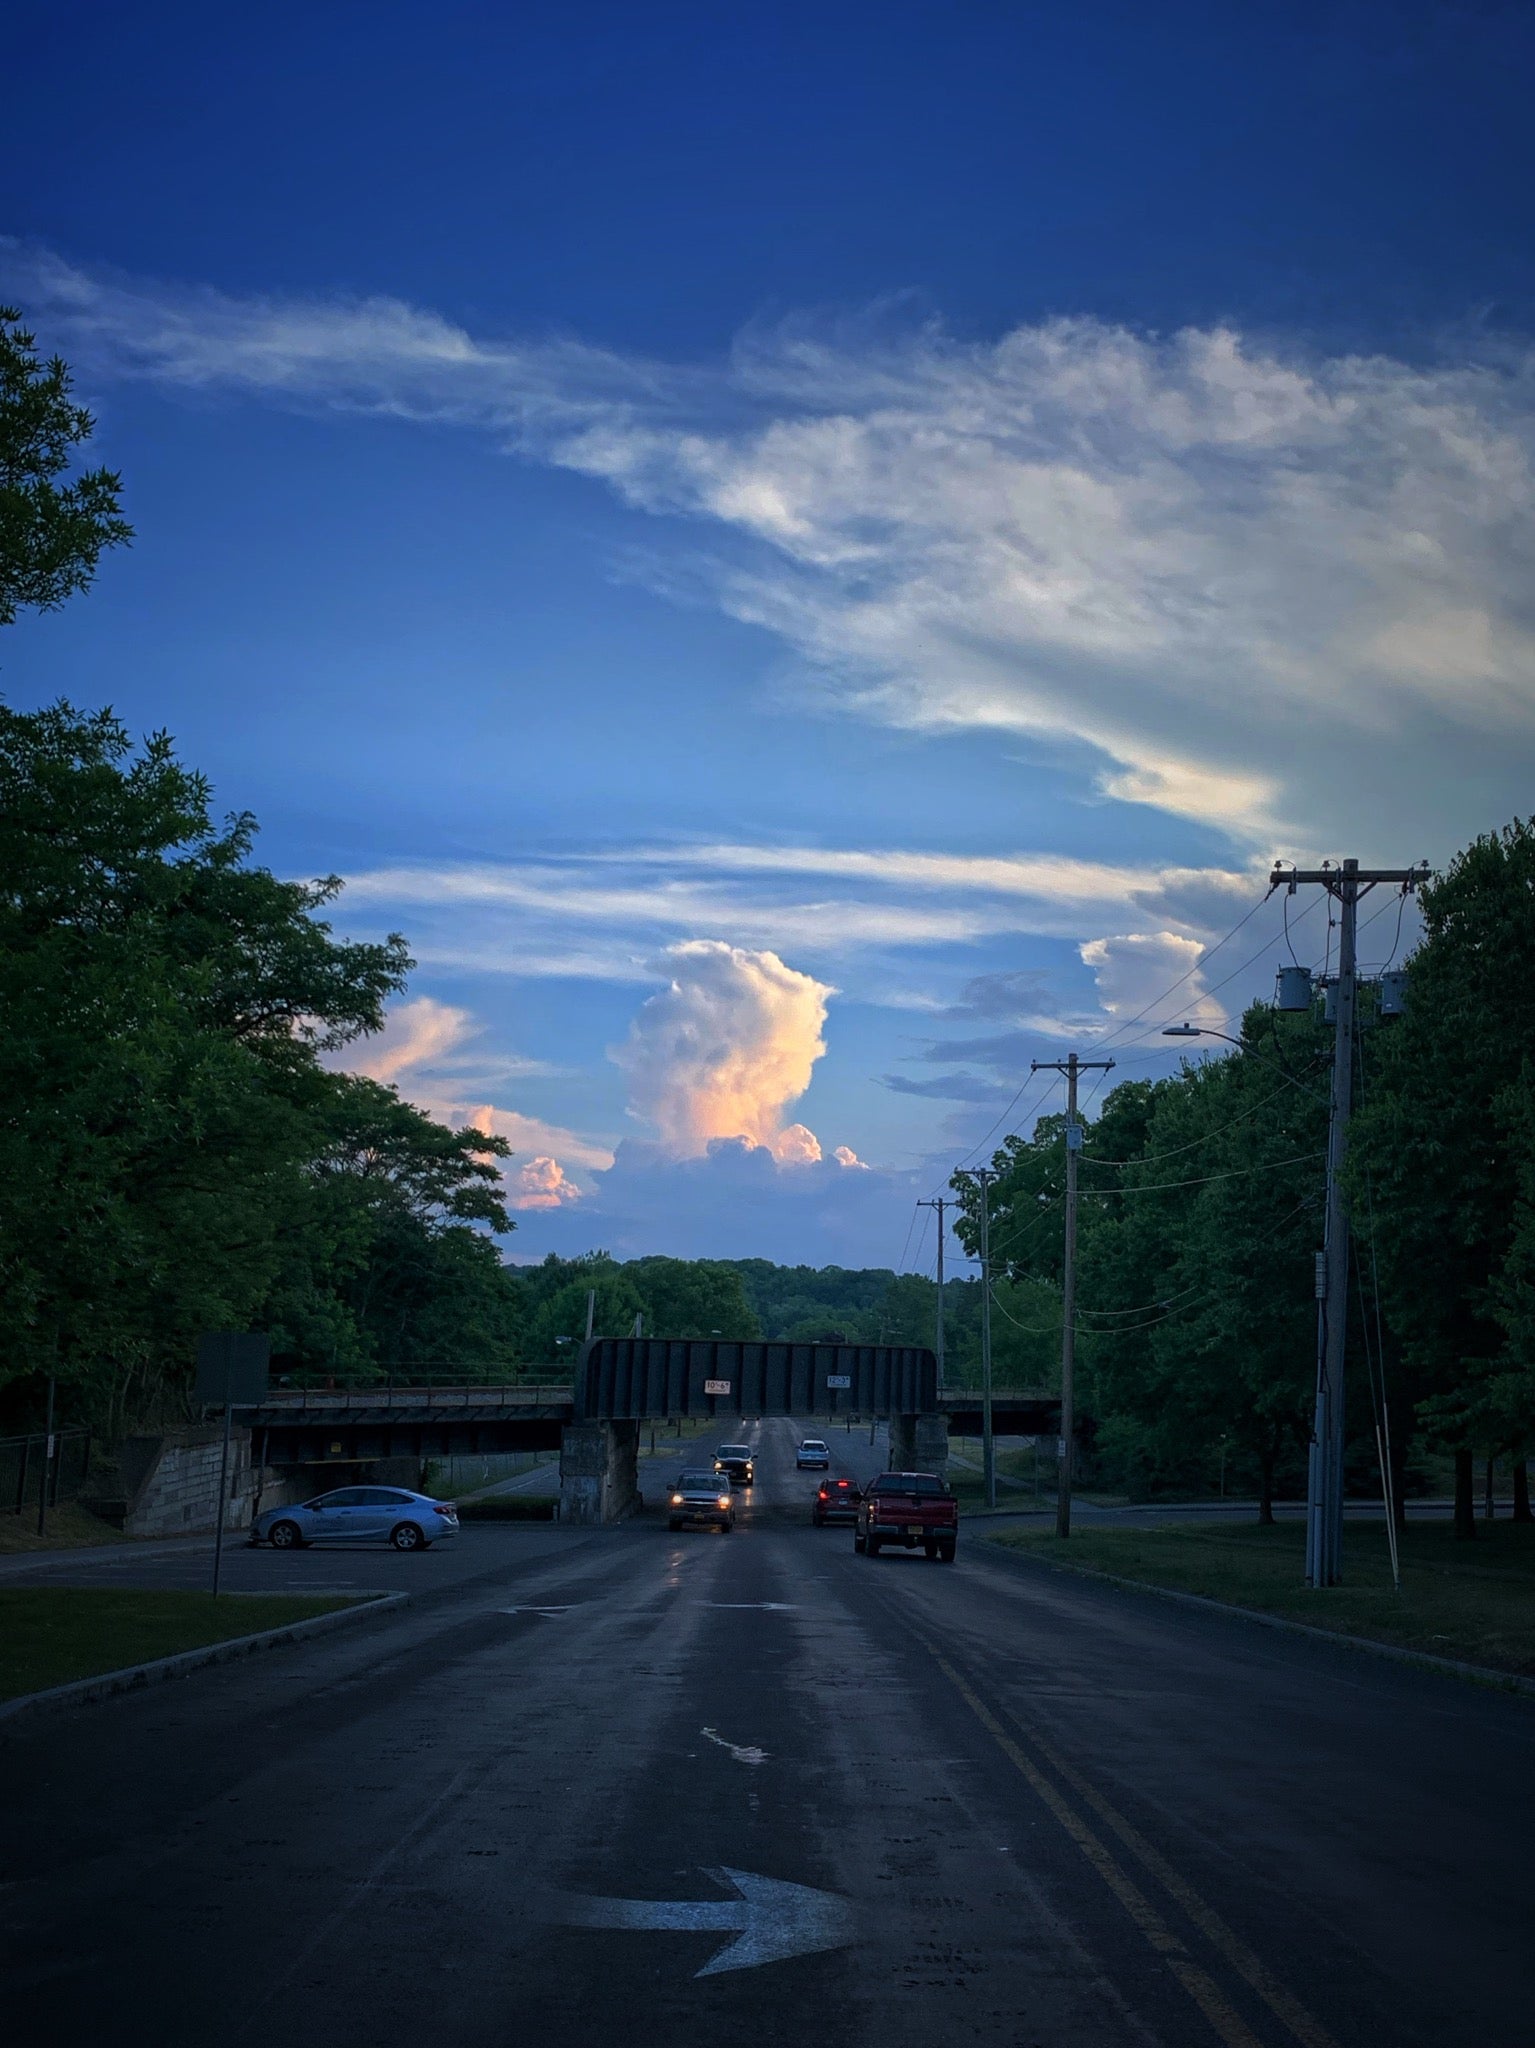 Railway Bridge over West Ave in Canandaigua NY in July 2020